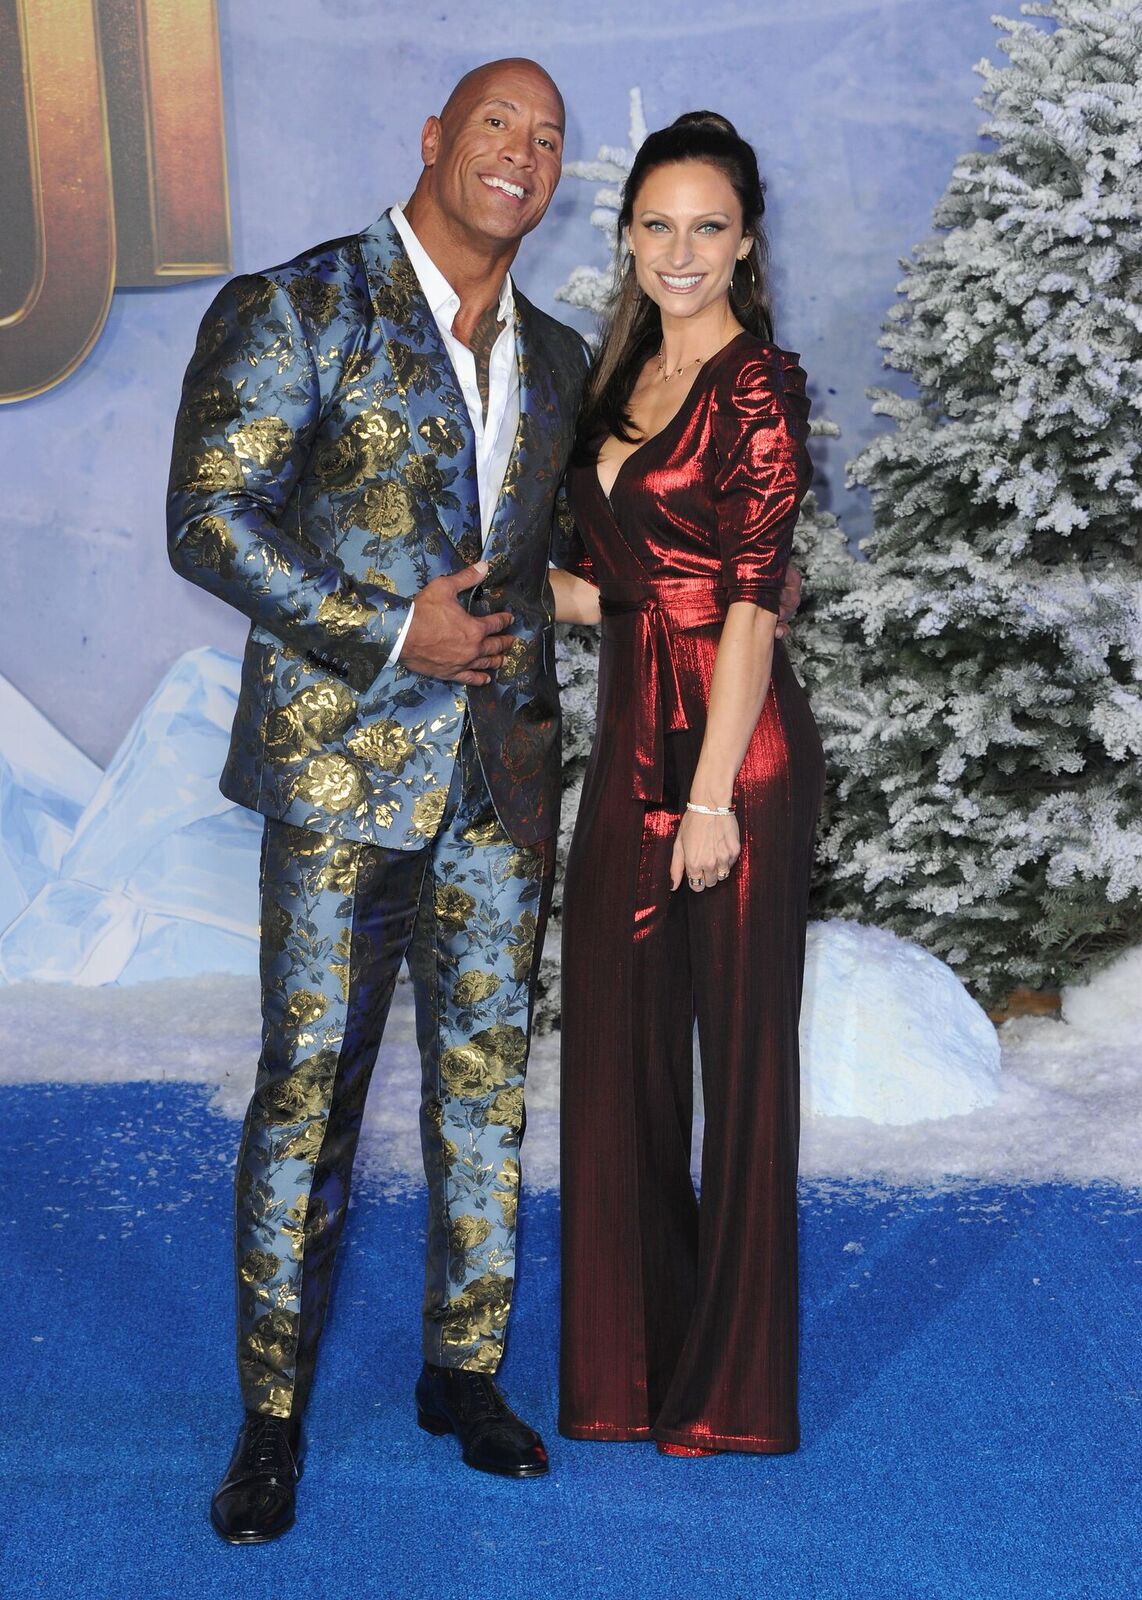 Dwayne Johnson and wife Lauren Hashian arrive at the Premiere Of Sony Pictures' "Jumanji: The Next Level" held at TCL Chinese Theatre on December 9, 2019 | Photo: Getty Images